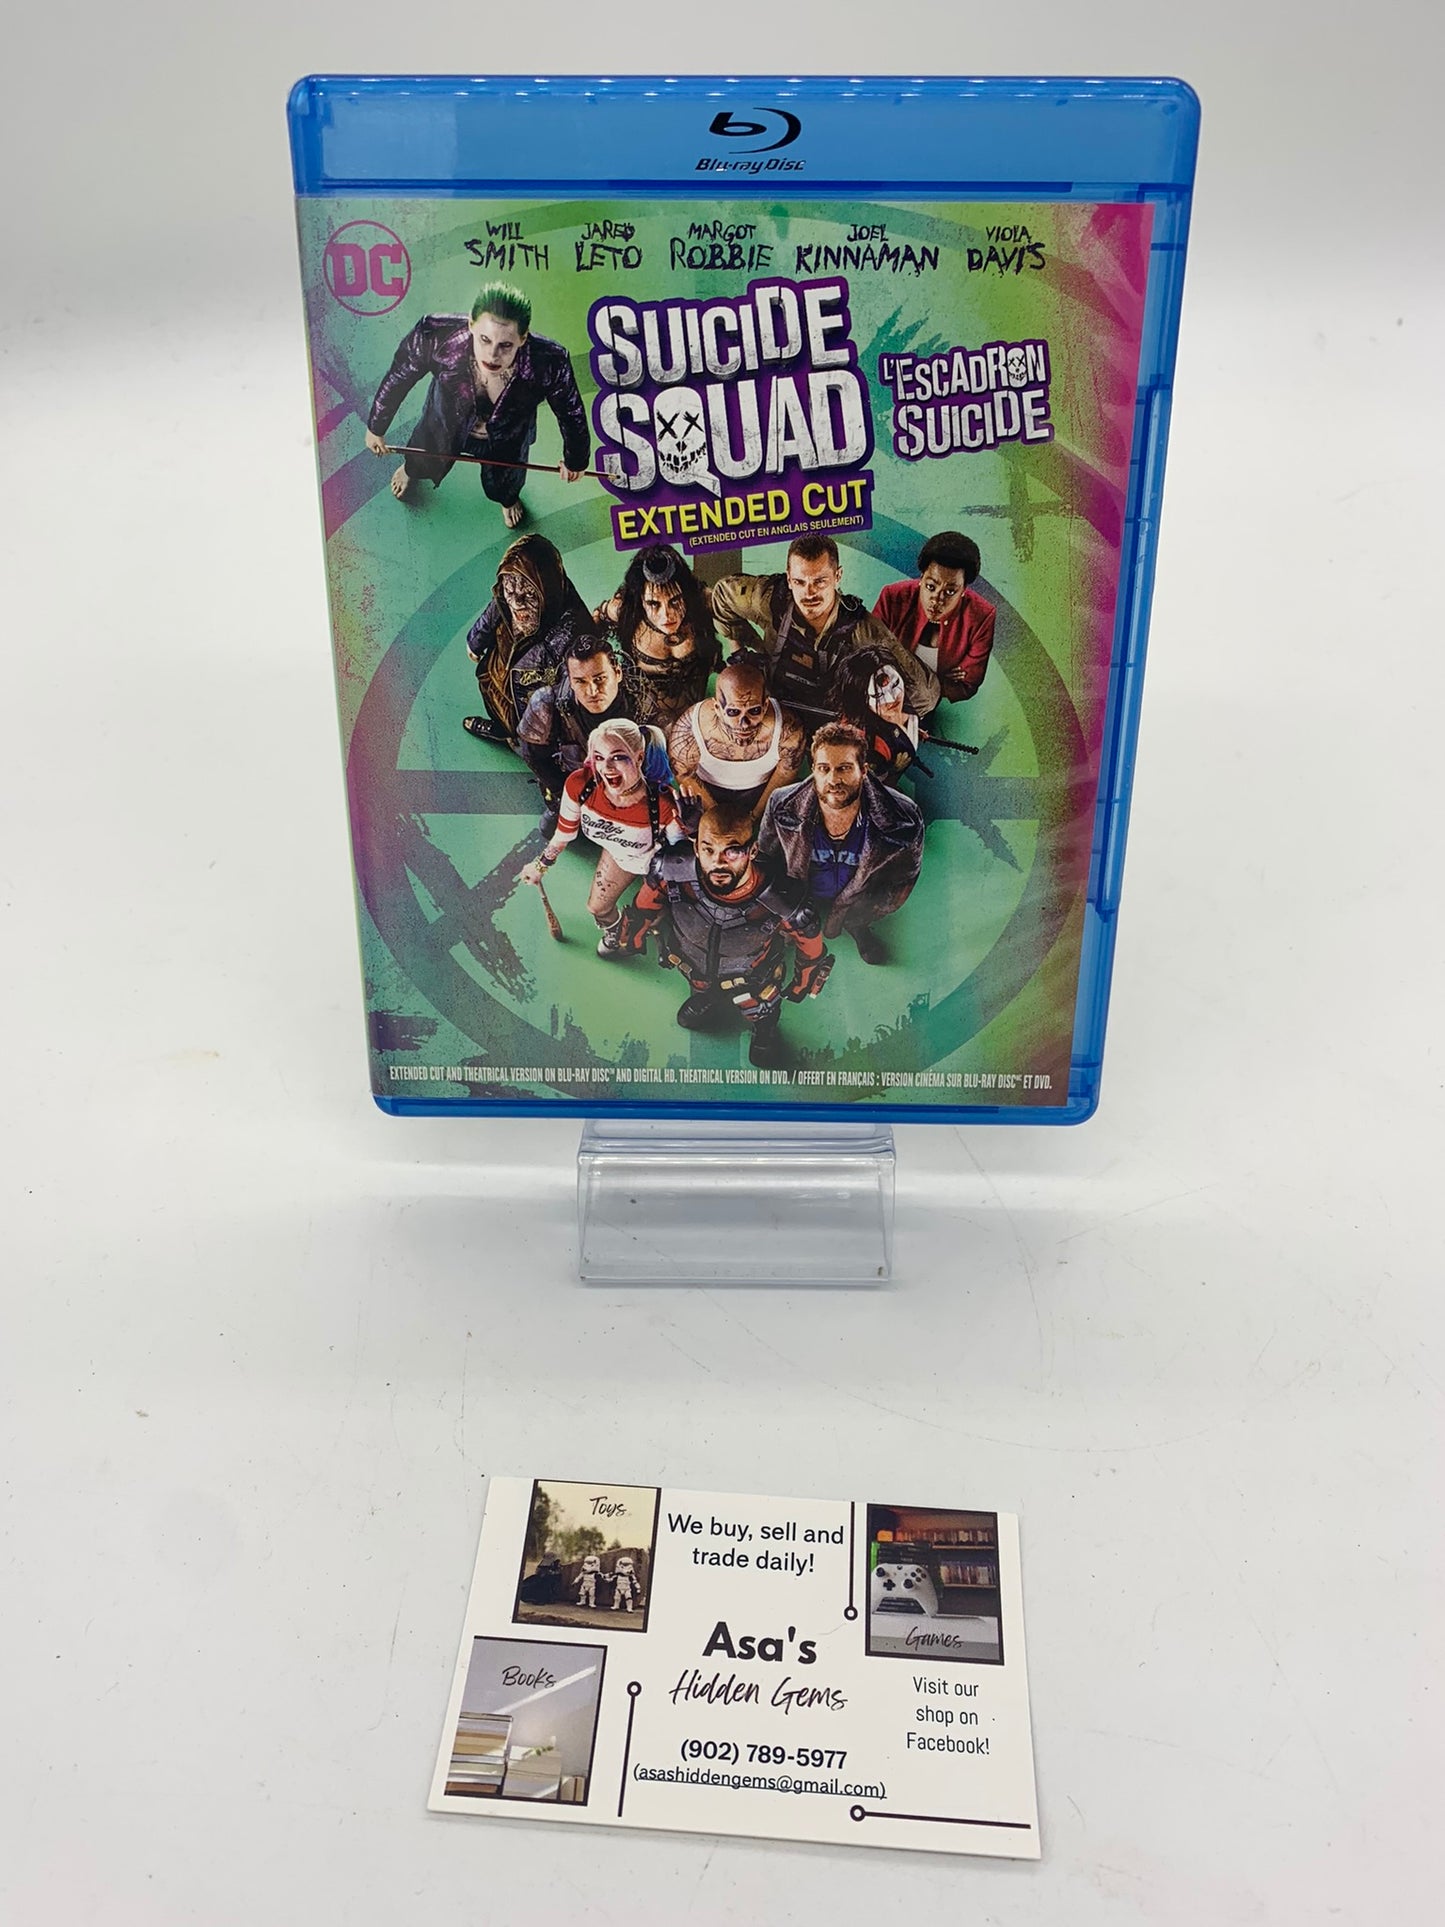 Suicide Squad (Blu-ray, 2016 - Extended Cut)